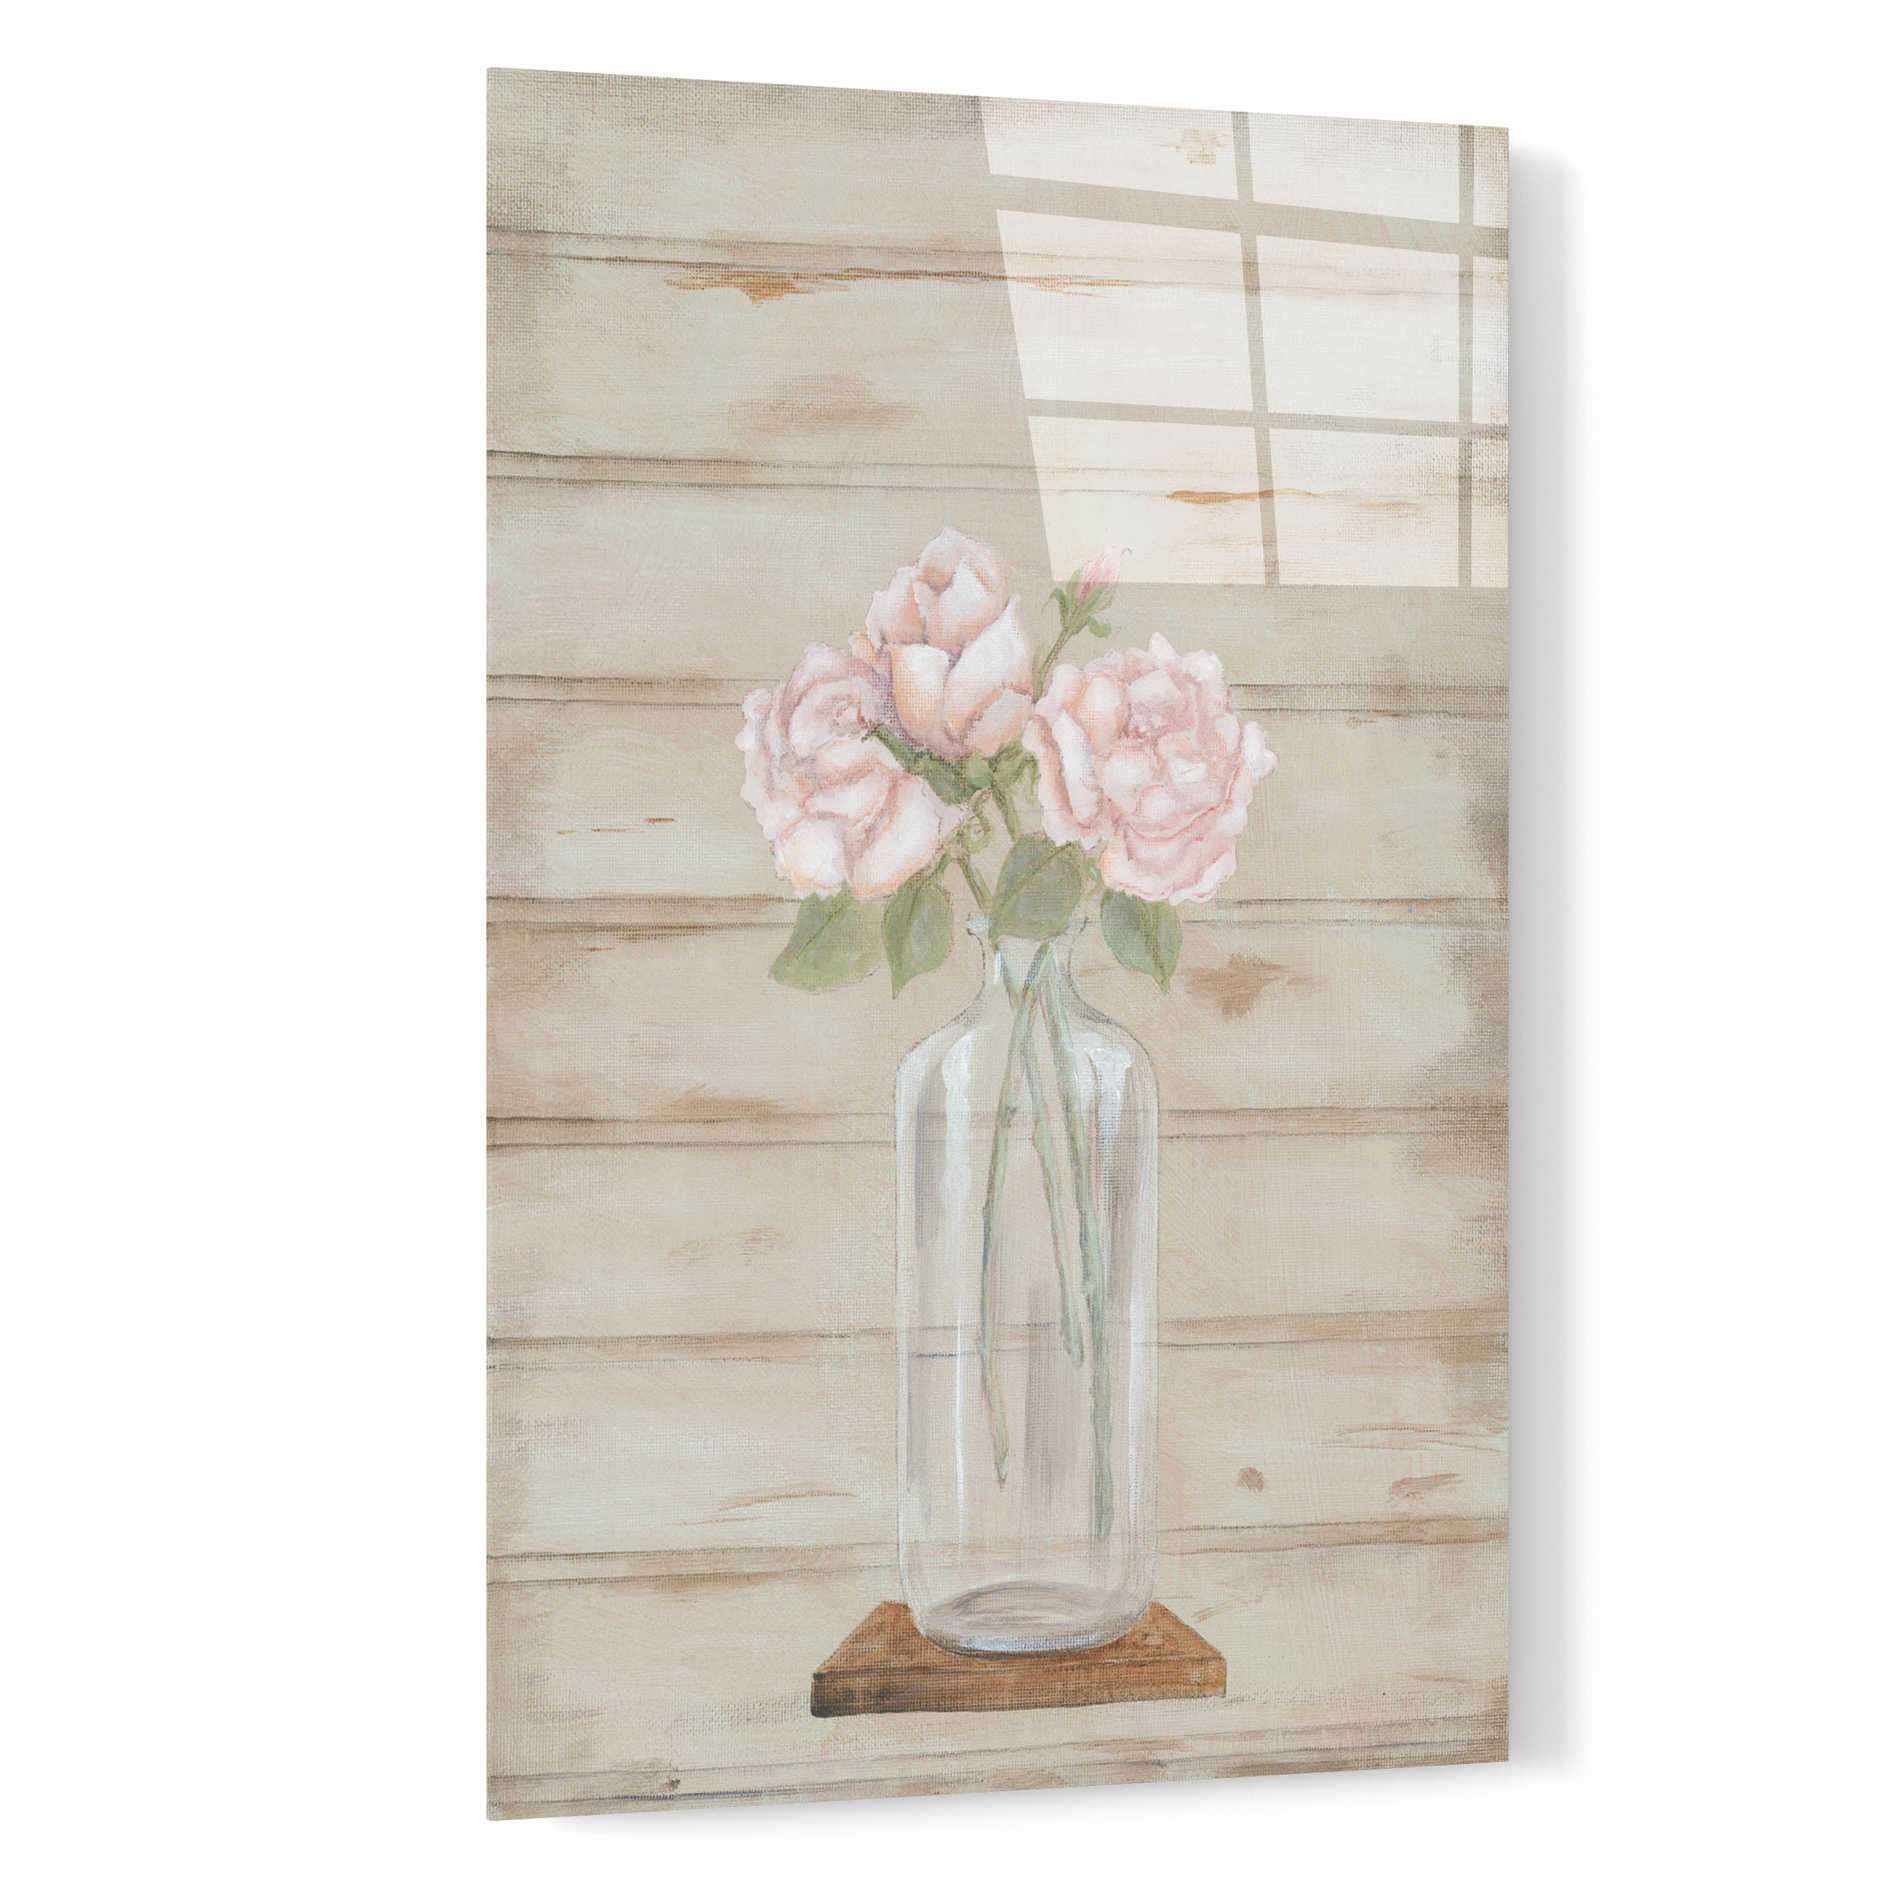 Epic Art 'Roses in Glass Vase' by Pam Britton, Acrylic Glass Wall Art,16x24